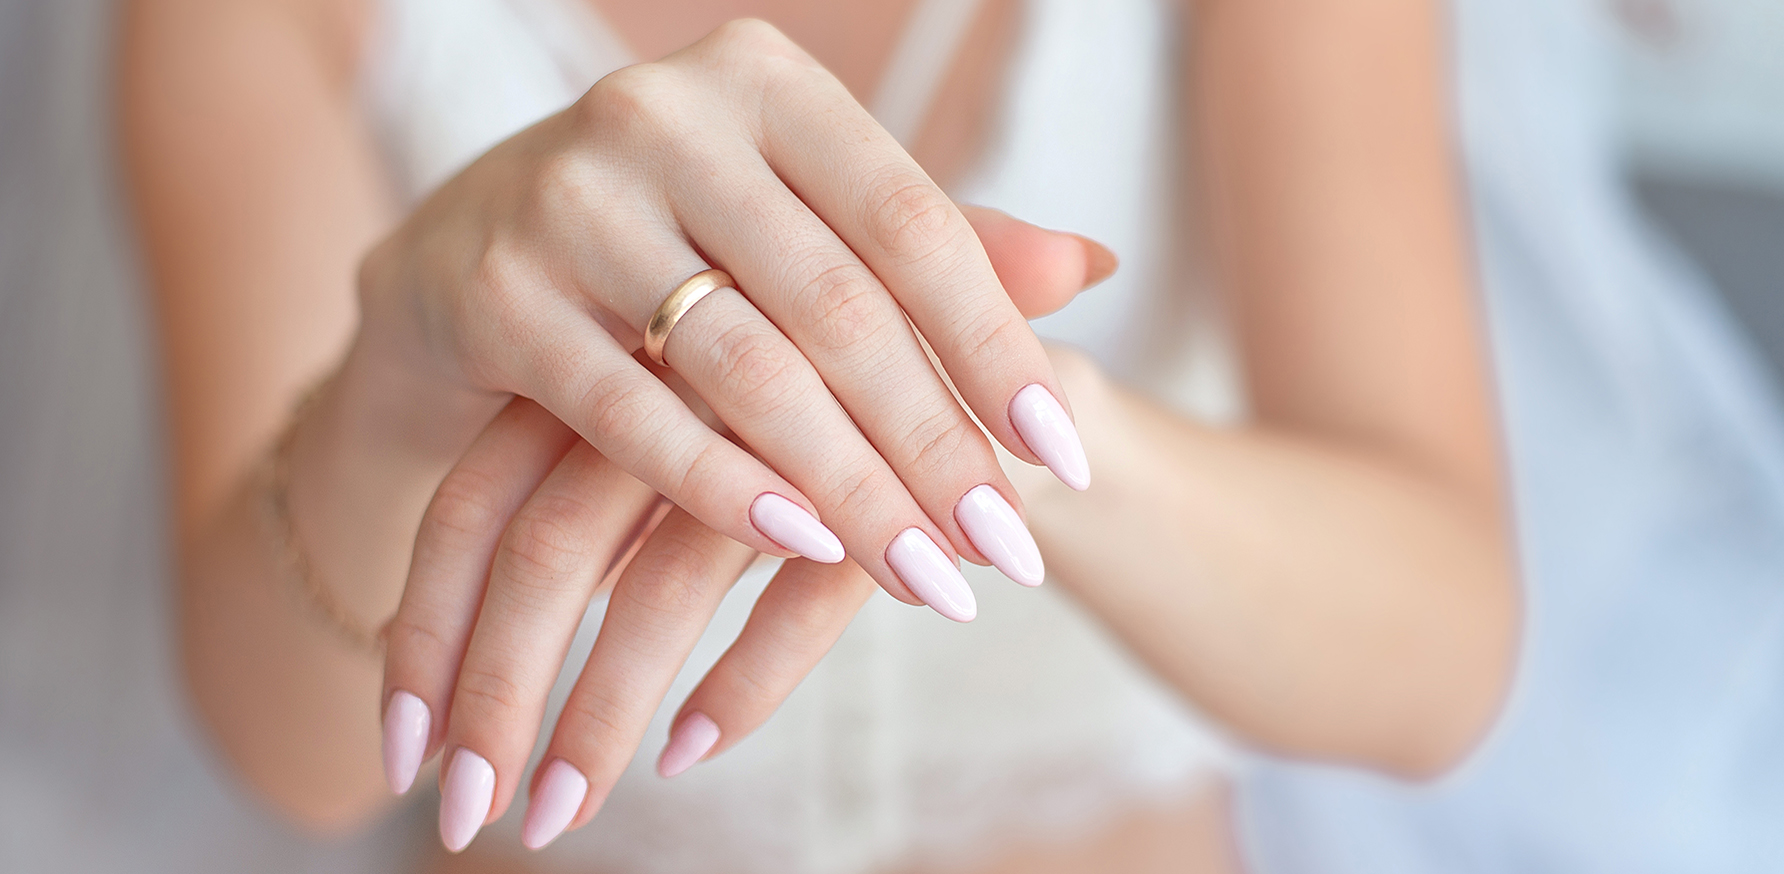 romantic-manicure-ideas-for-valentines-day-woman-with-light-pink-nails